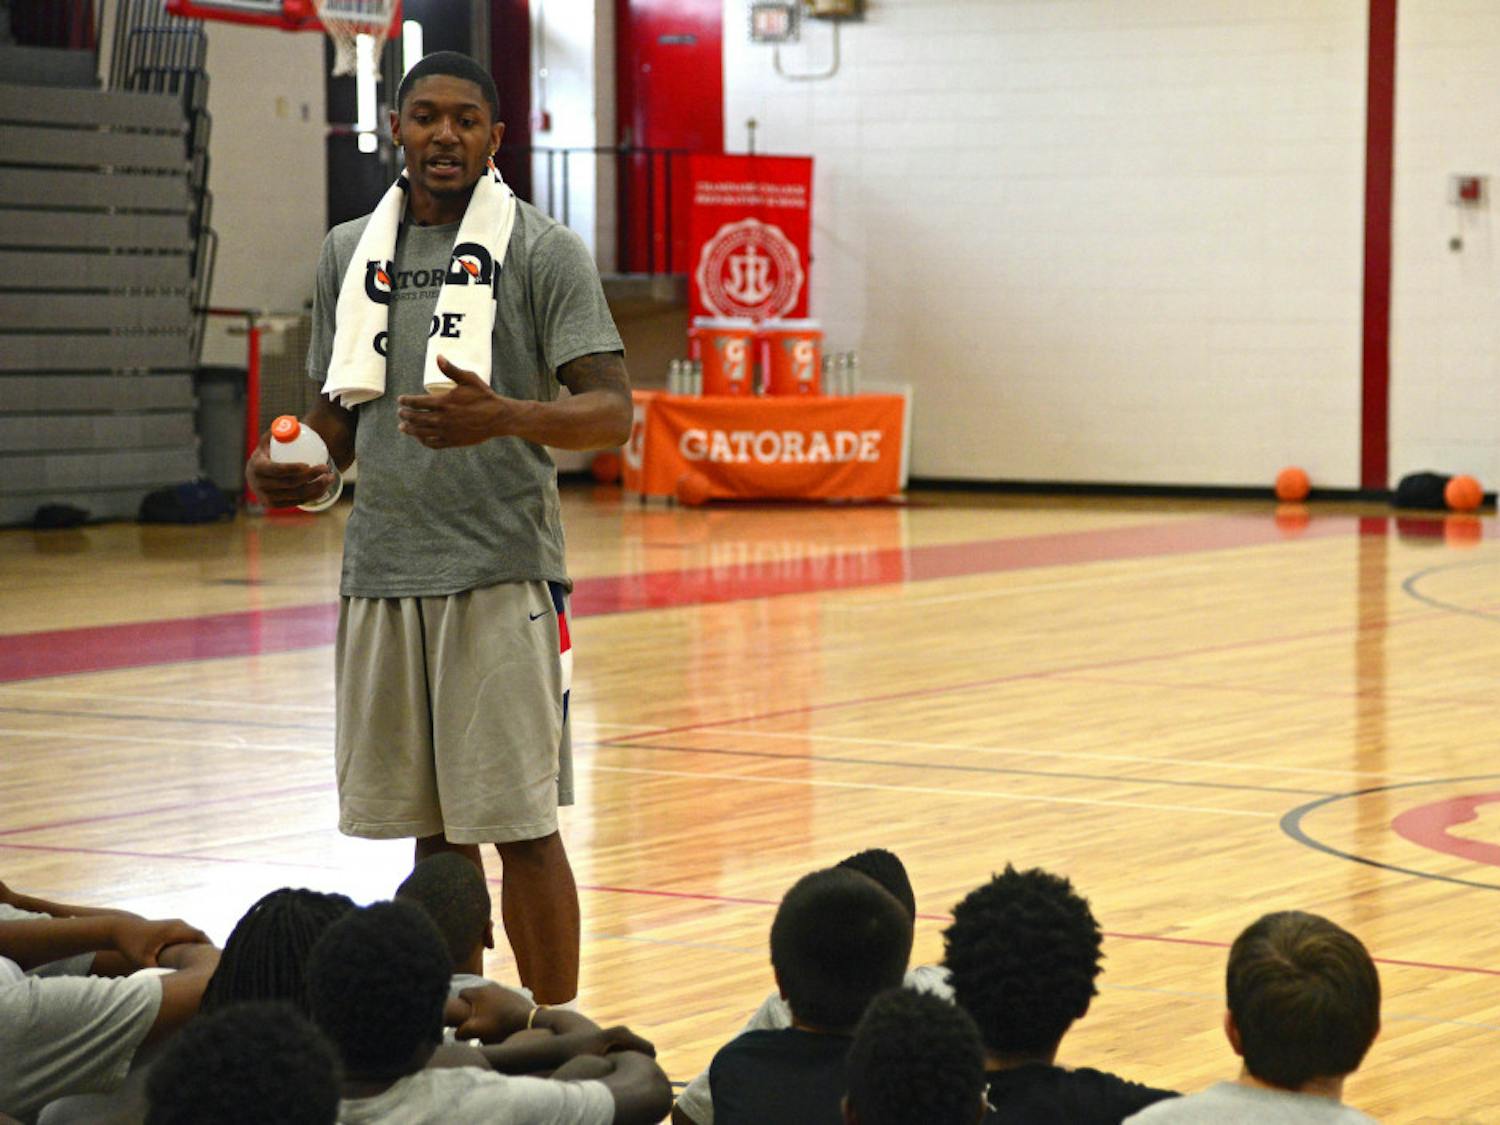 Washington Wizard's guard Bradley Beal delivers a special presentation about heat safety and hydration to youth athletes on behalf of Gatorade's Beat the Heat program. 